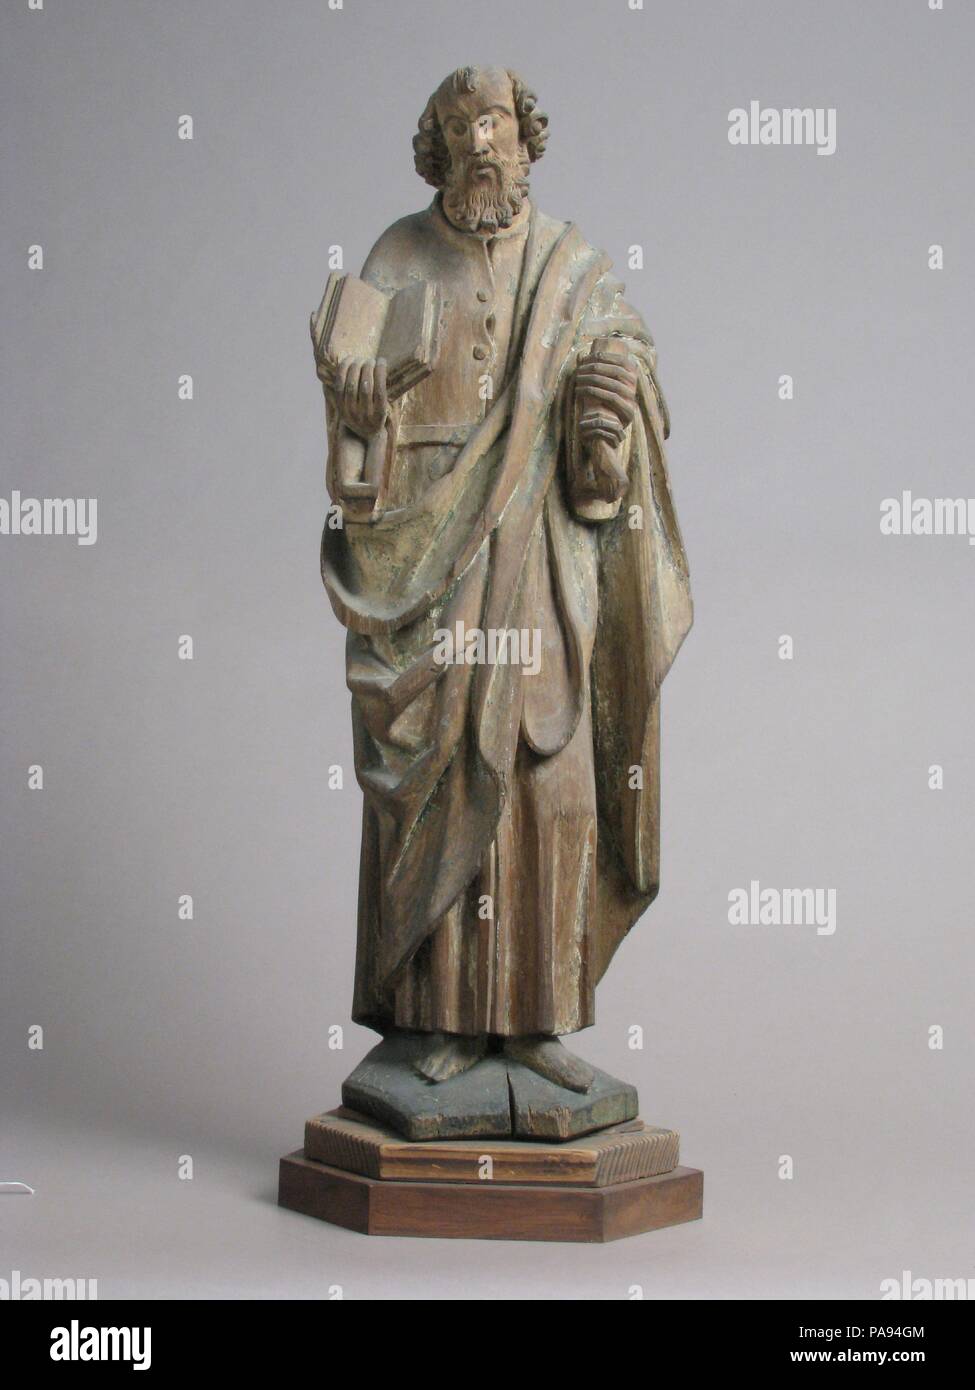 Saint Matthew (?). Culture: North Netherlandish. Dimensions: Overall: 24 5/8 x 8 3/4 x 5 1/2in. (62.5 x 22.2 x 14cm)  without base: 22 3/4 x 7 3/4 x 5in. (57.8 x 19.7 x 12.7cm). Date: ca. 1500. Museum: Metropolitan Museum of Art, New York, USA. Stock Photo